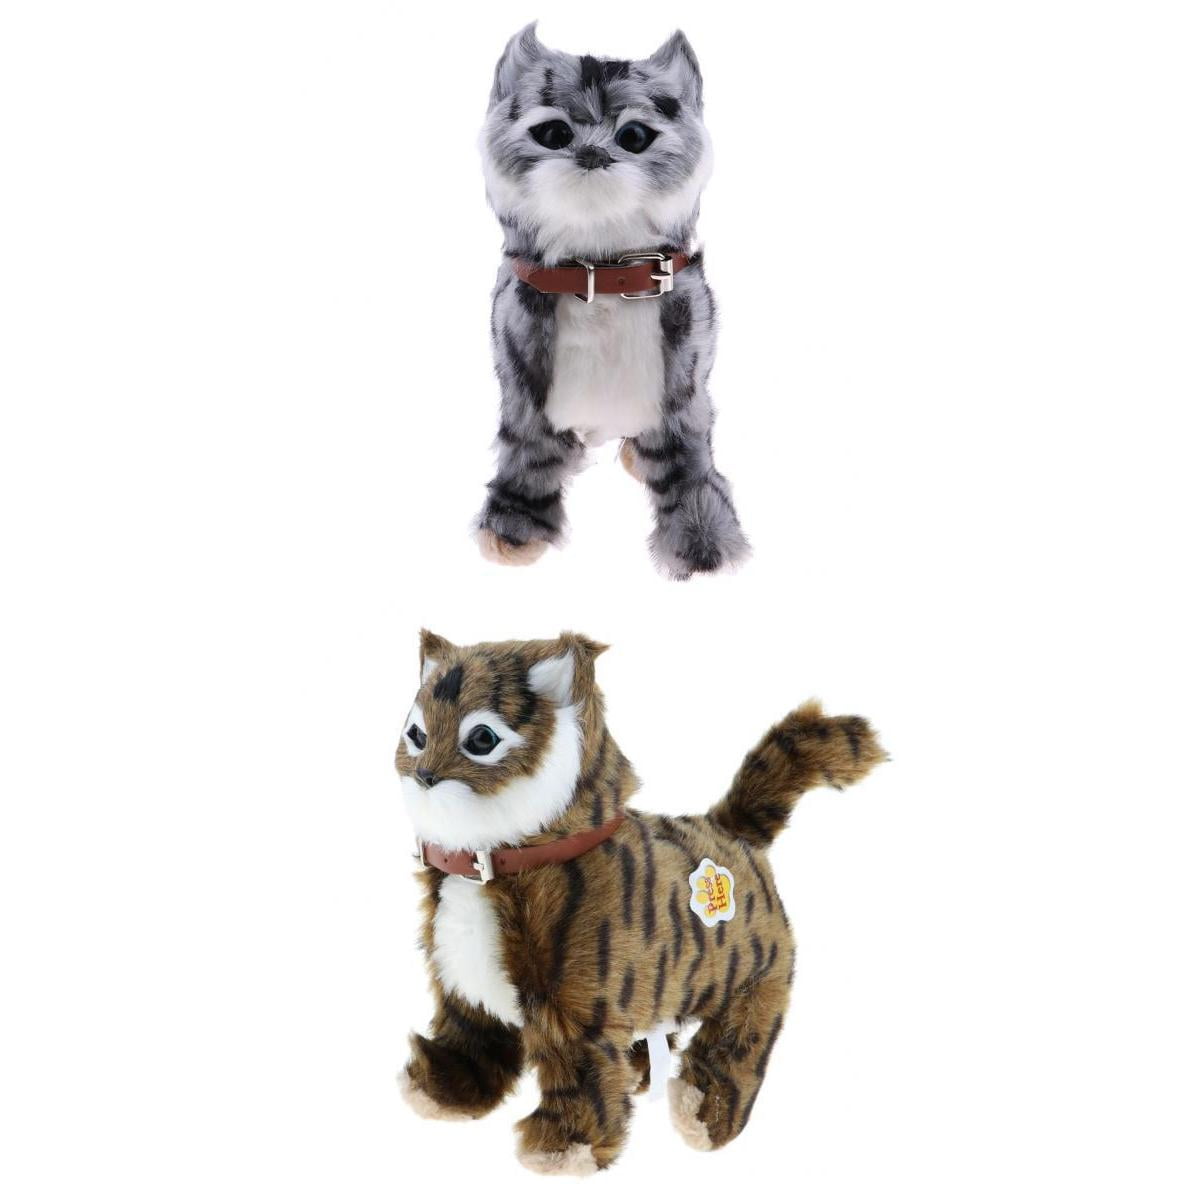 Cat Meow Wagging Electronic Toys Plush Cat Toys Stuffed Toy Xmas Gift Brown 